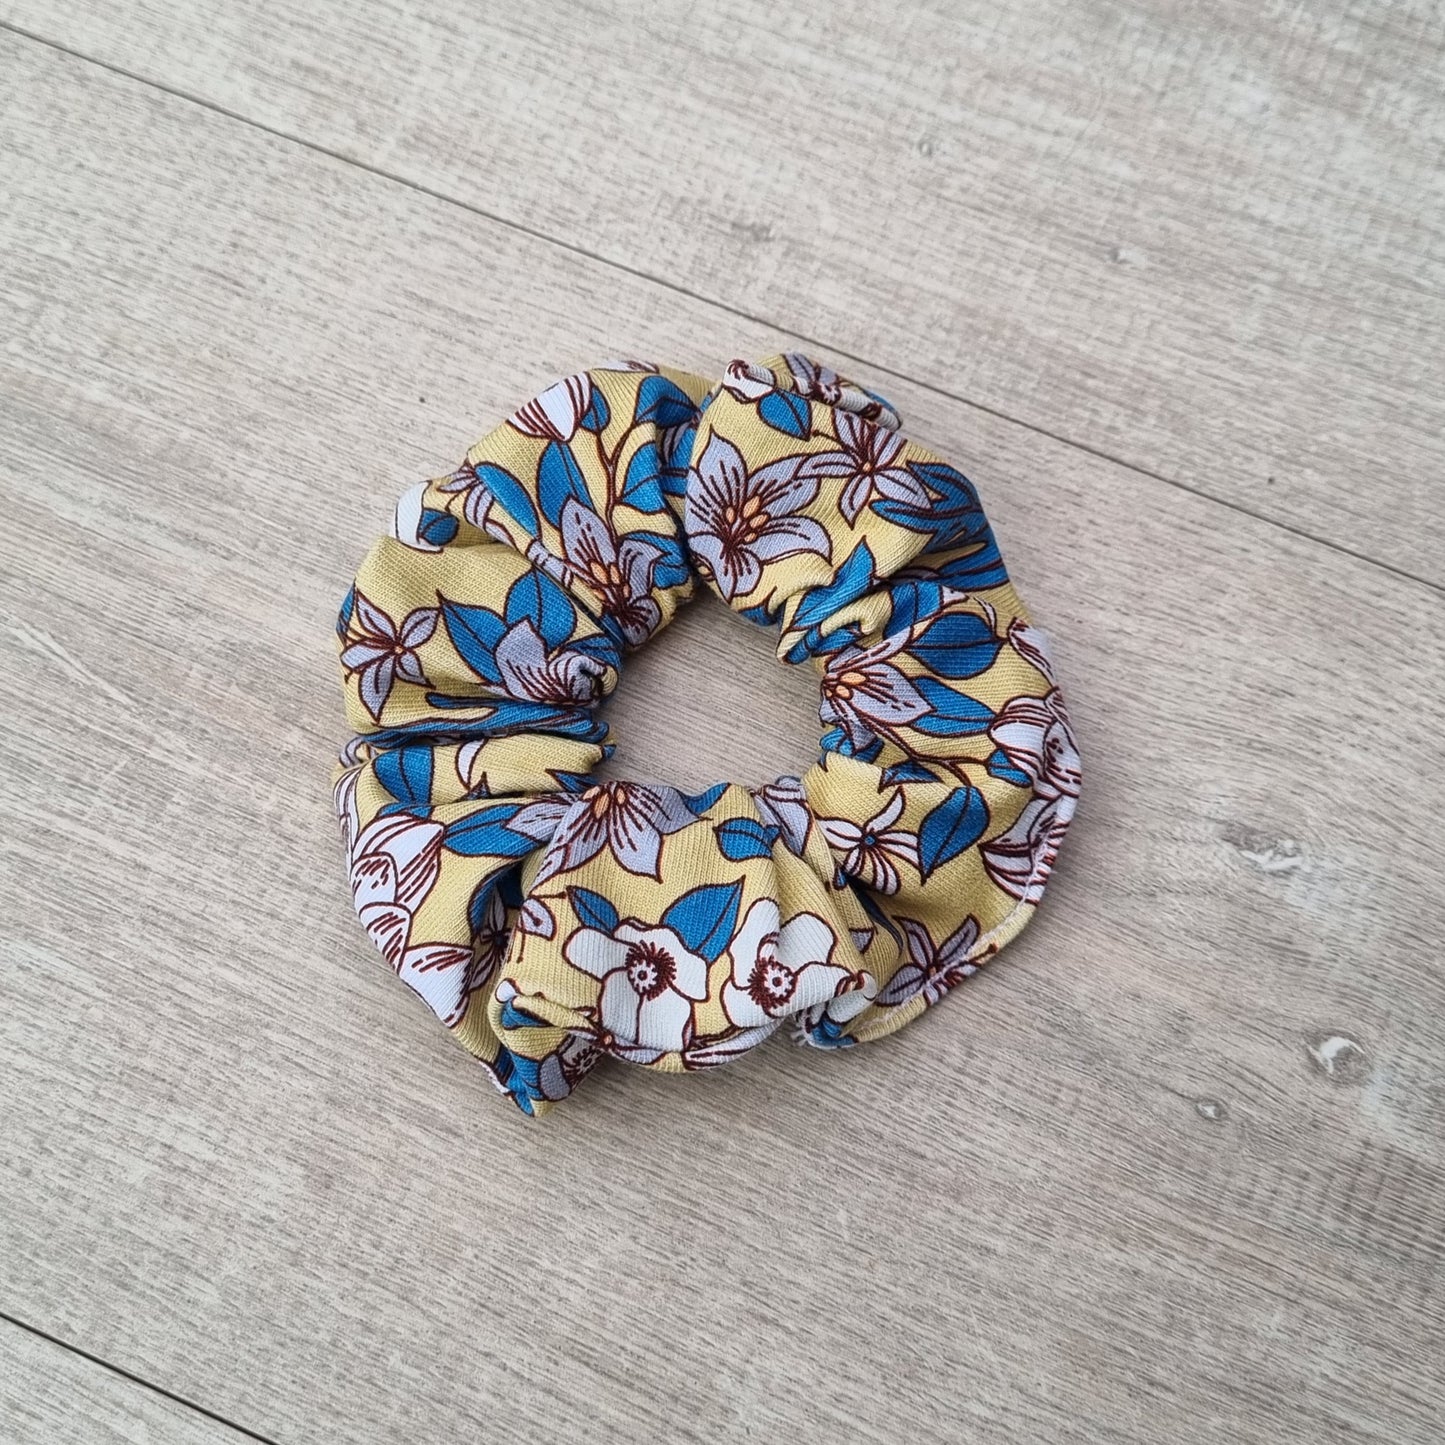 Scrunchie - April against wooden backdrop. Blue and white flowers on yellow background.